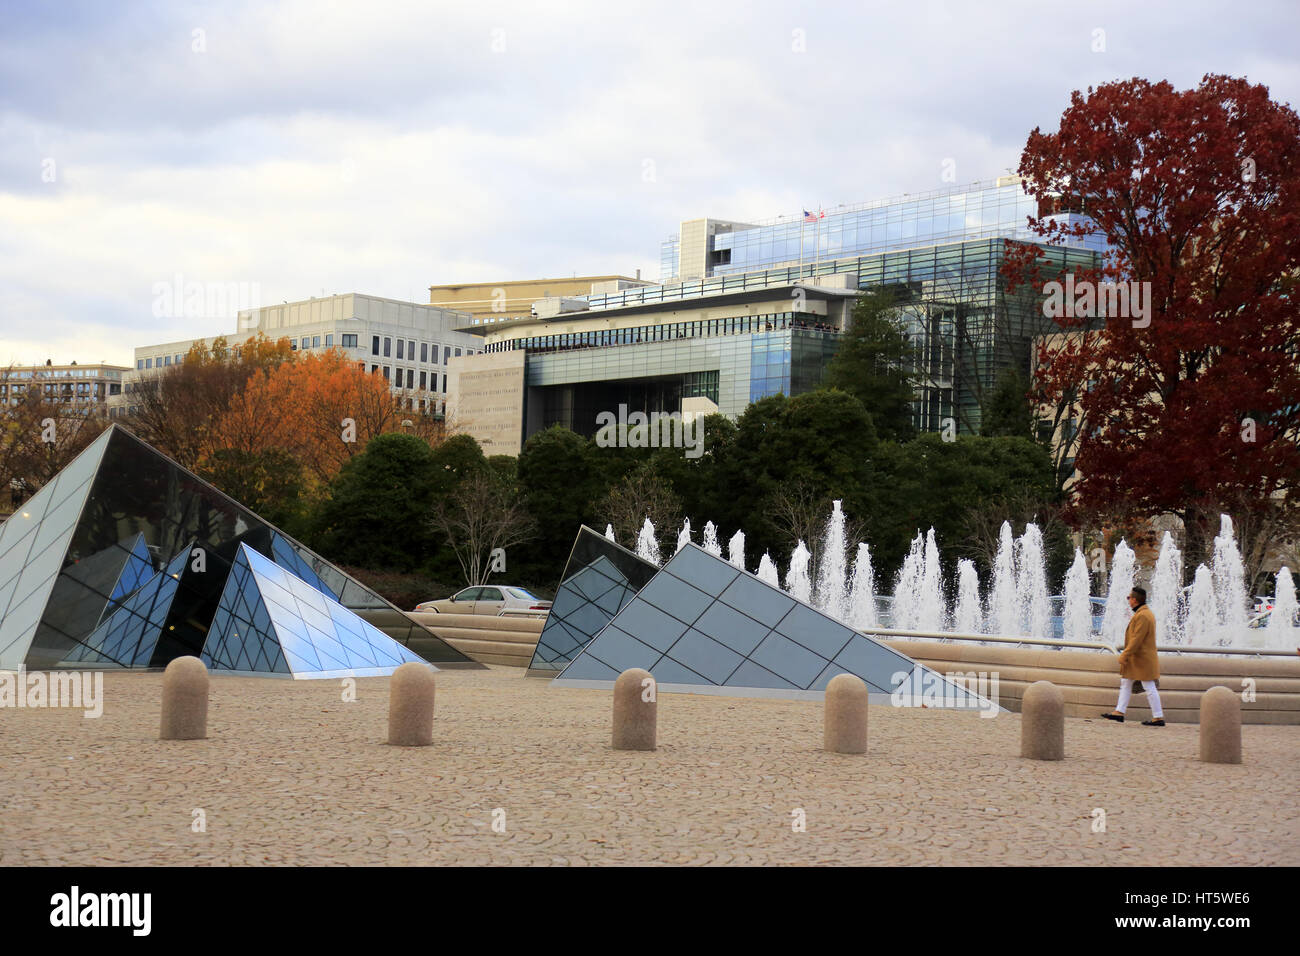 The glass pyramids of the East Building of National Gallery of Art designed by I.M.Pei. Washington D.C, USA Stock Photo